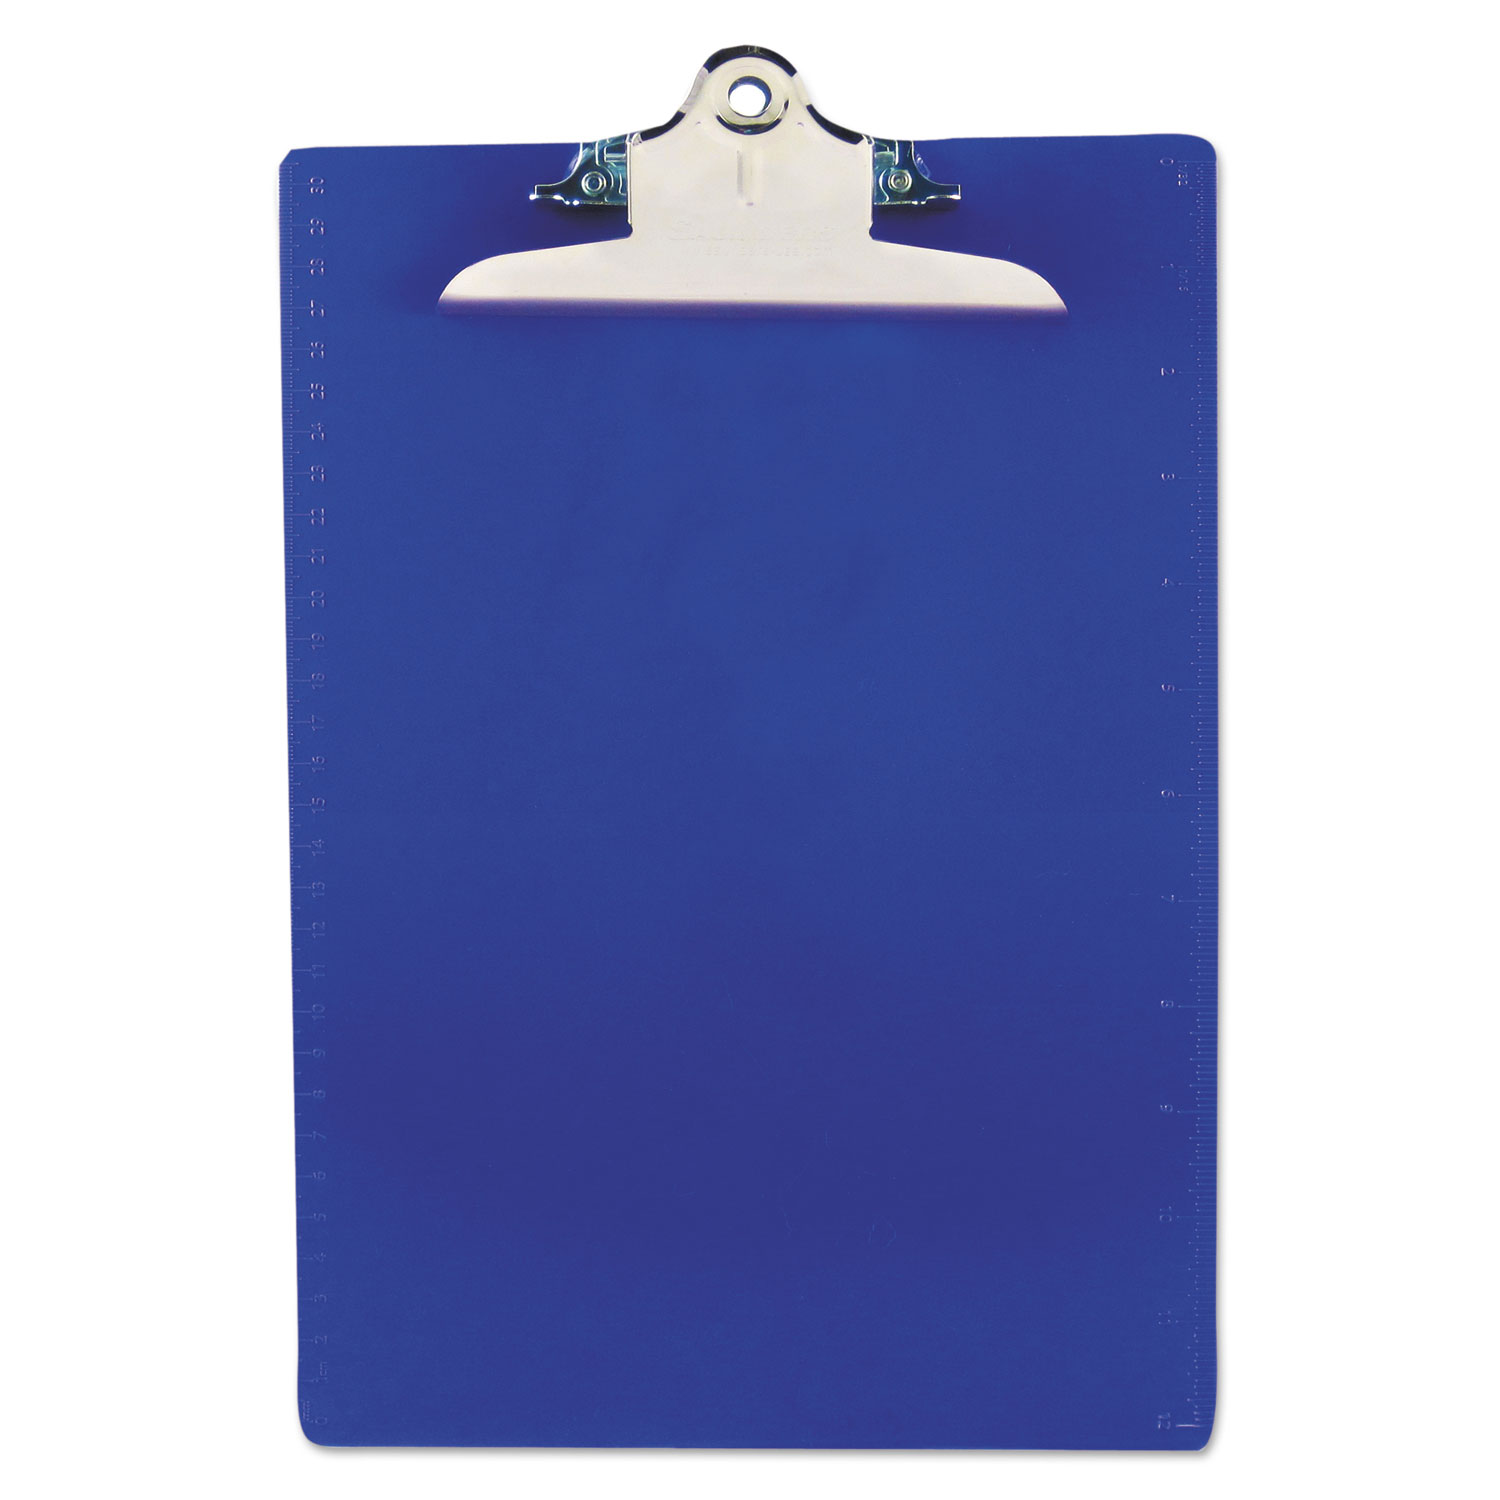 Recycled Plastic Clipboard with Ruler Edge, 1" Clip Cap, 8 1/2 x 12 Sheets, Blue